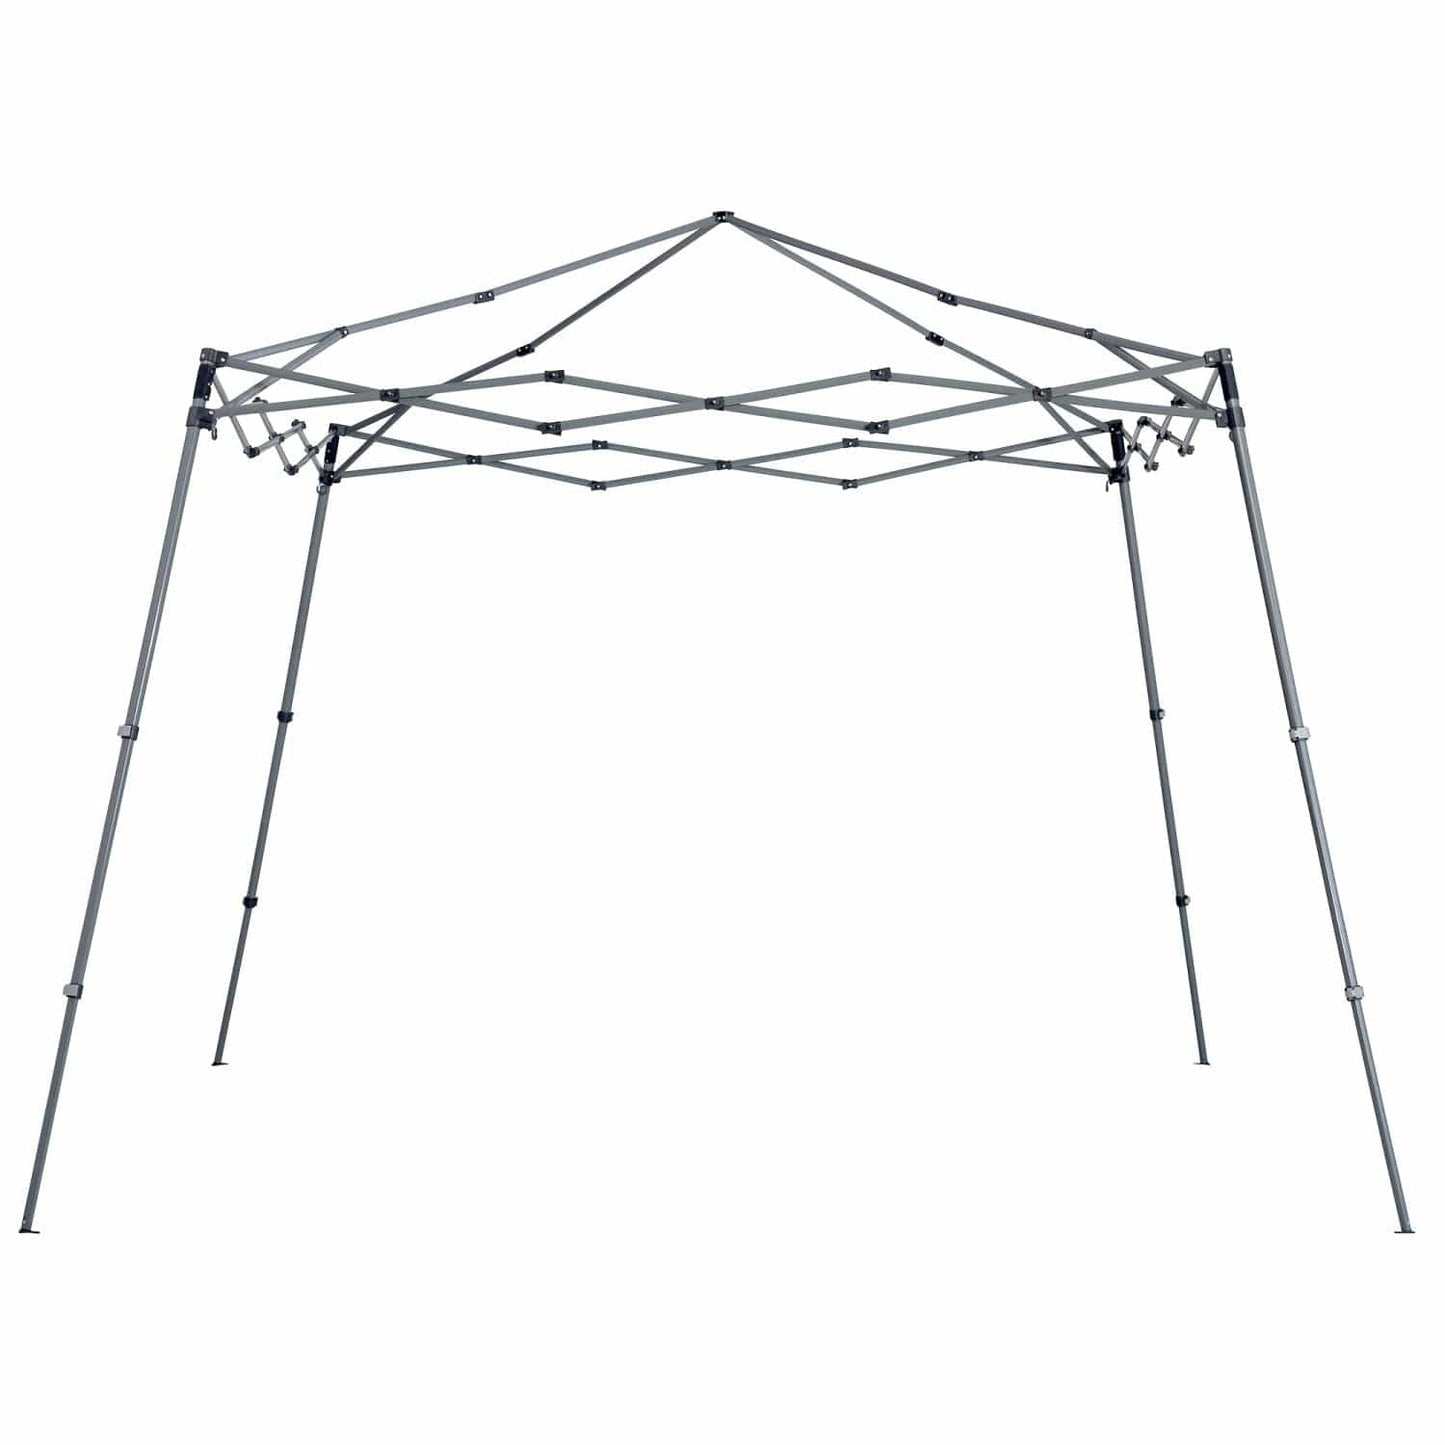 Quik Shade Pop Up Canopies Quik Shade | Solo Steel 72 11' x 11' Slant Leg Canopy - Olive 167547DS